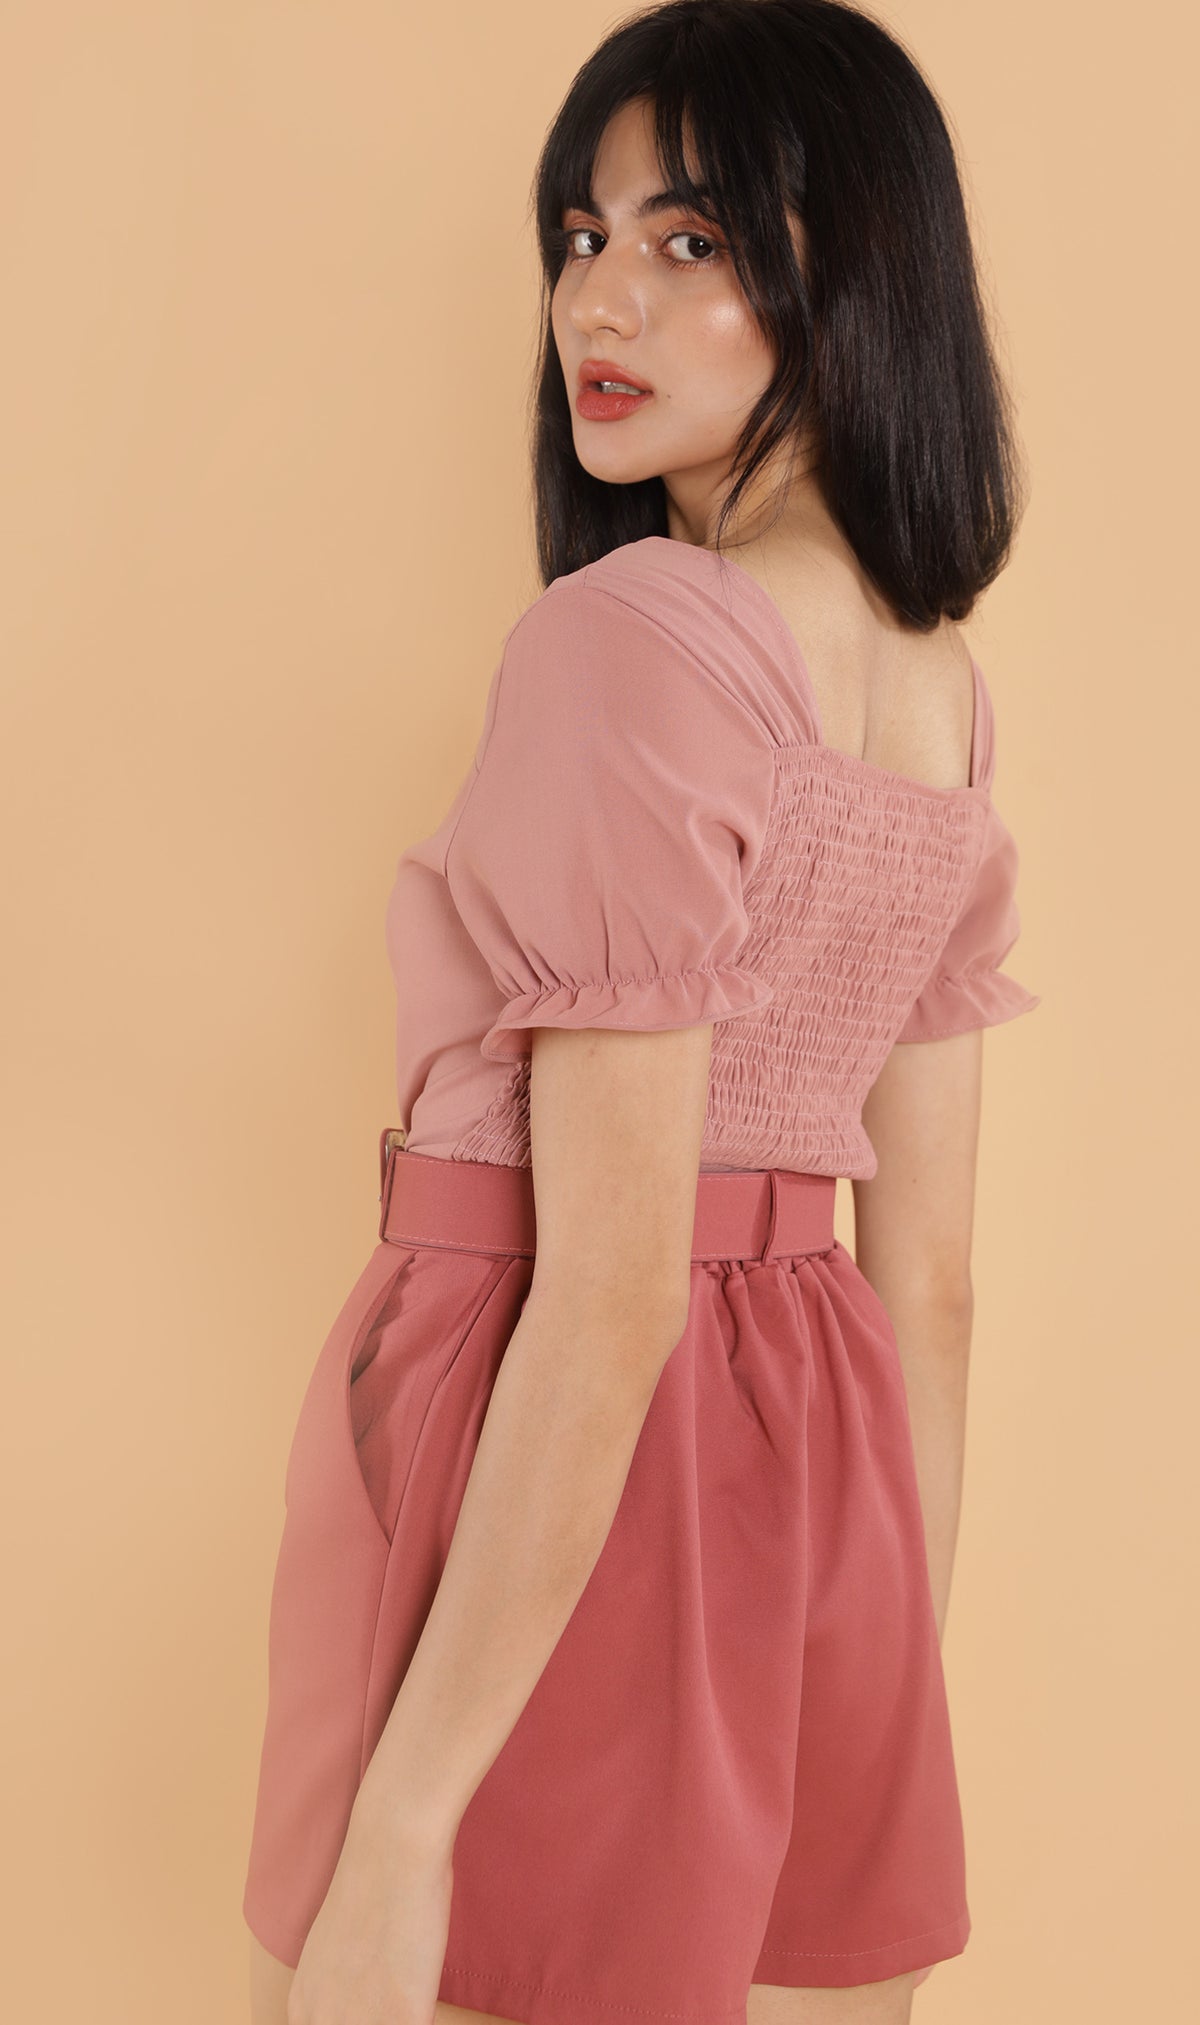 Pink Square Neck Top